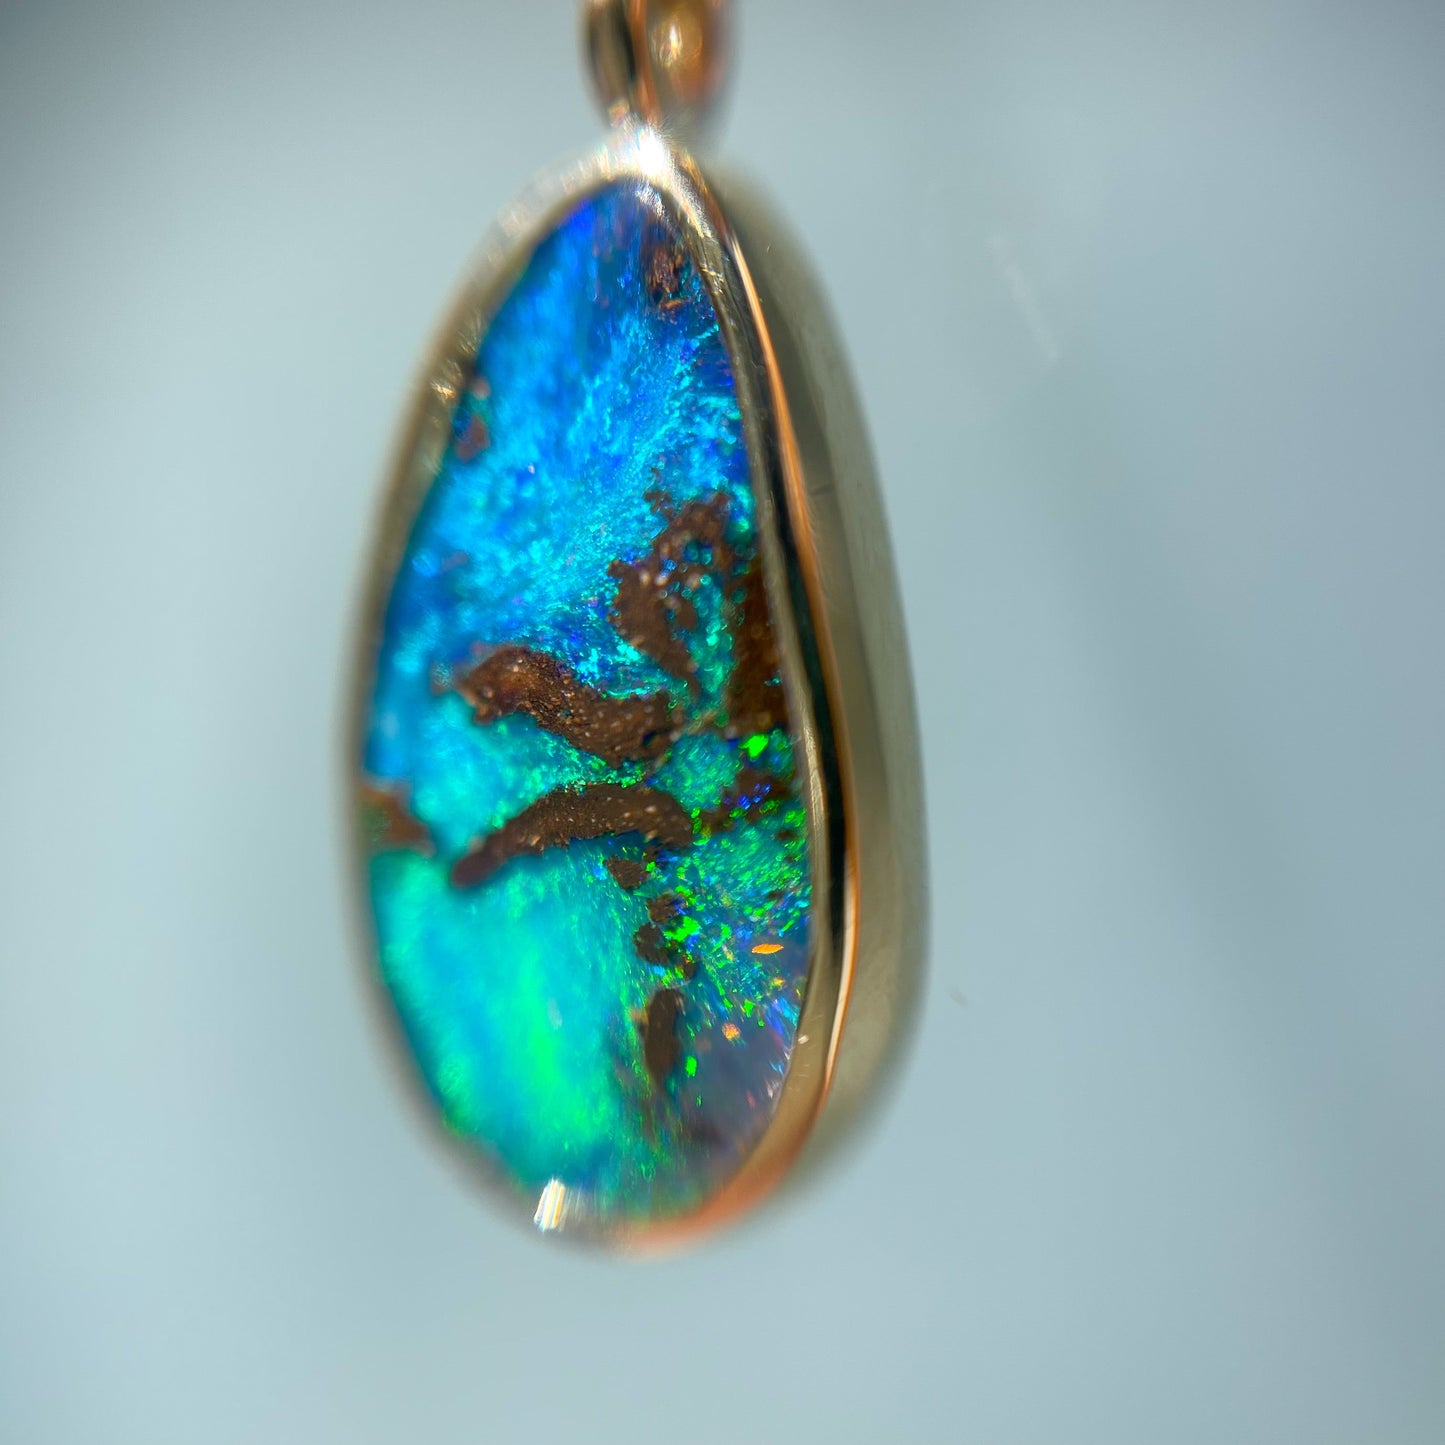 Close up shot of an Australian Opal Necklace by NIXIN Jewelry. Image shows the opal pendant at a slight angle to highlight the blue and green fire and palm tree pattern.